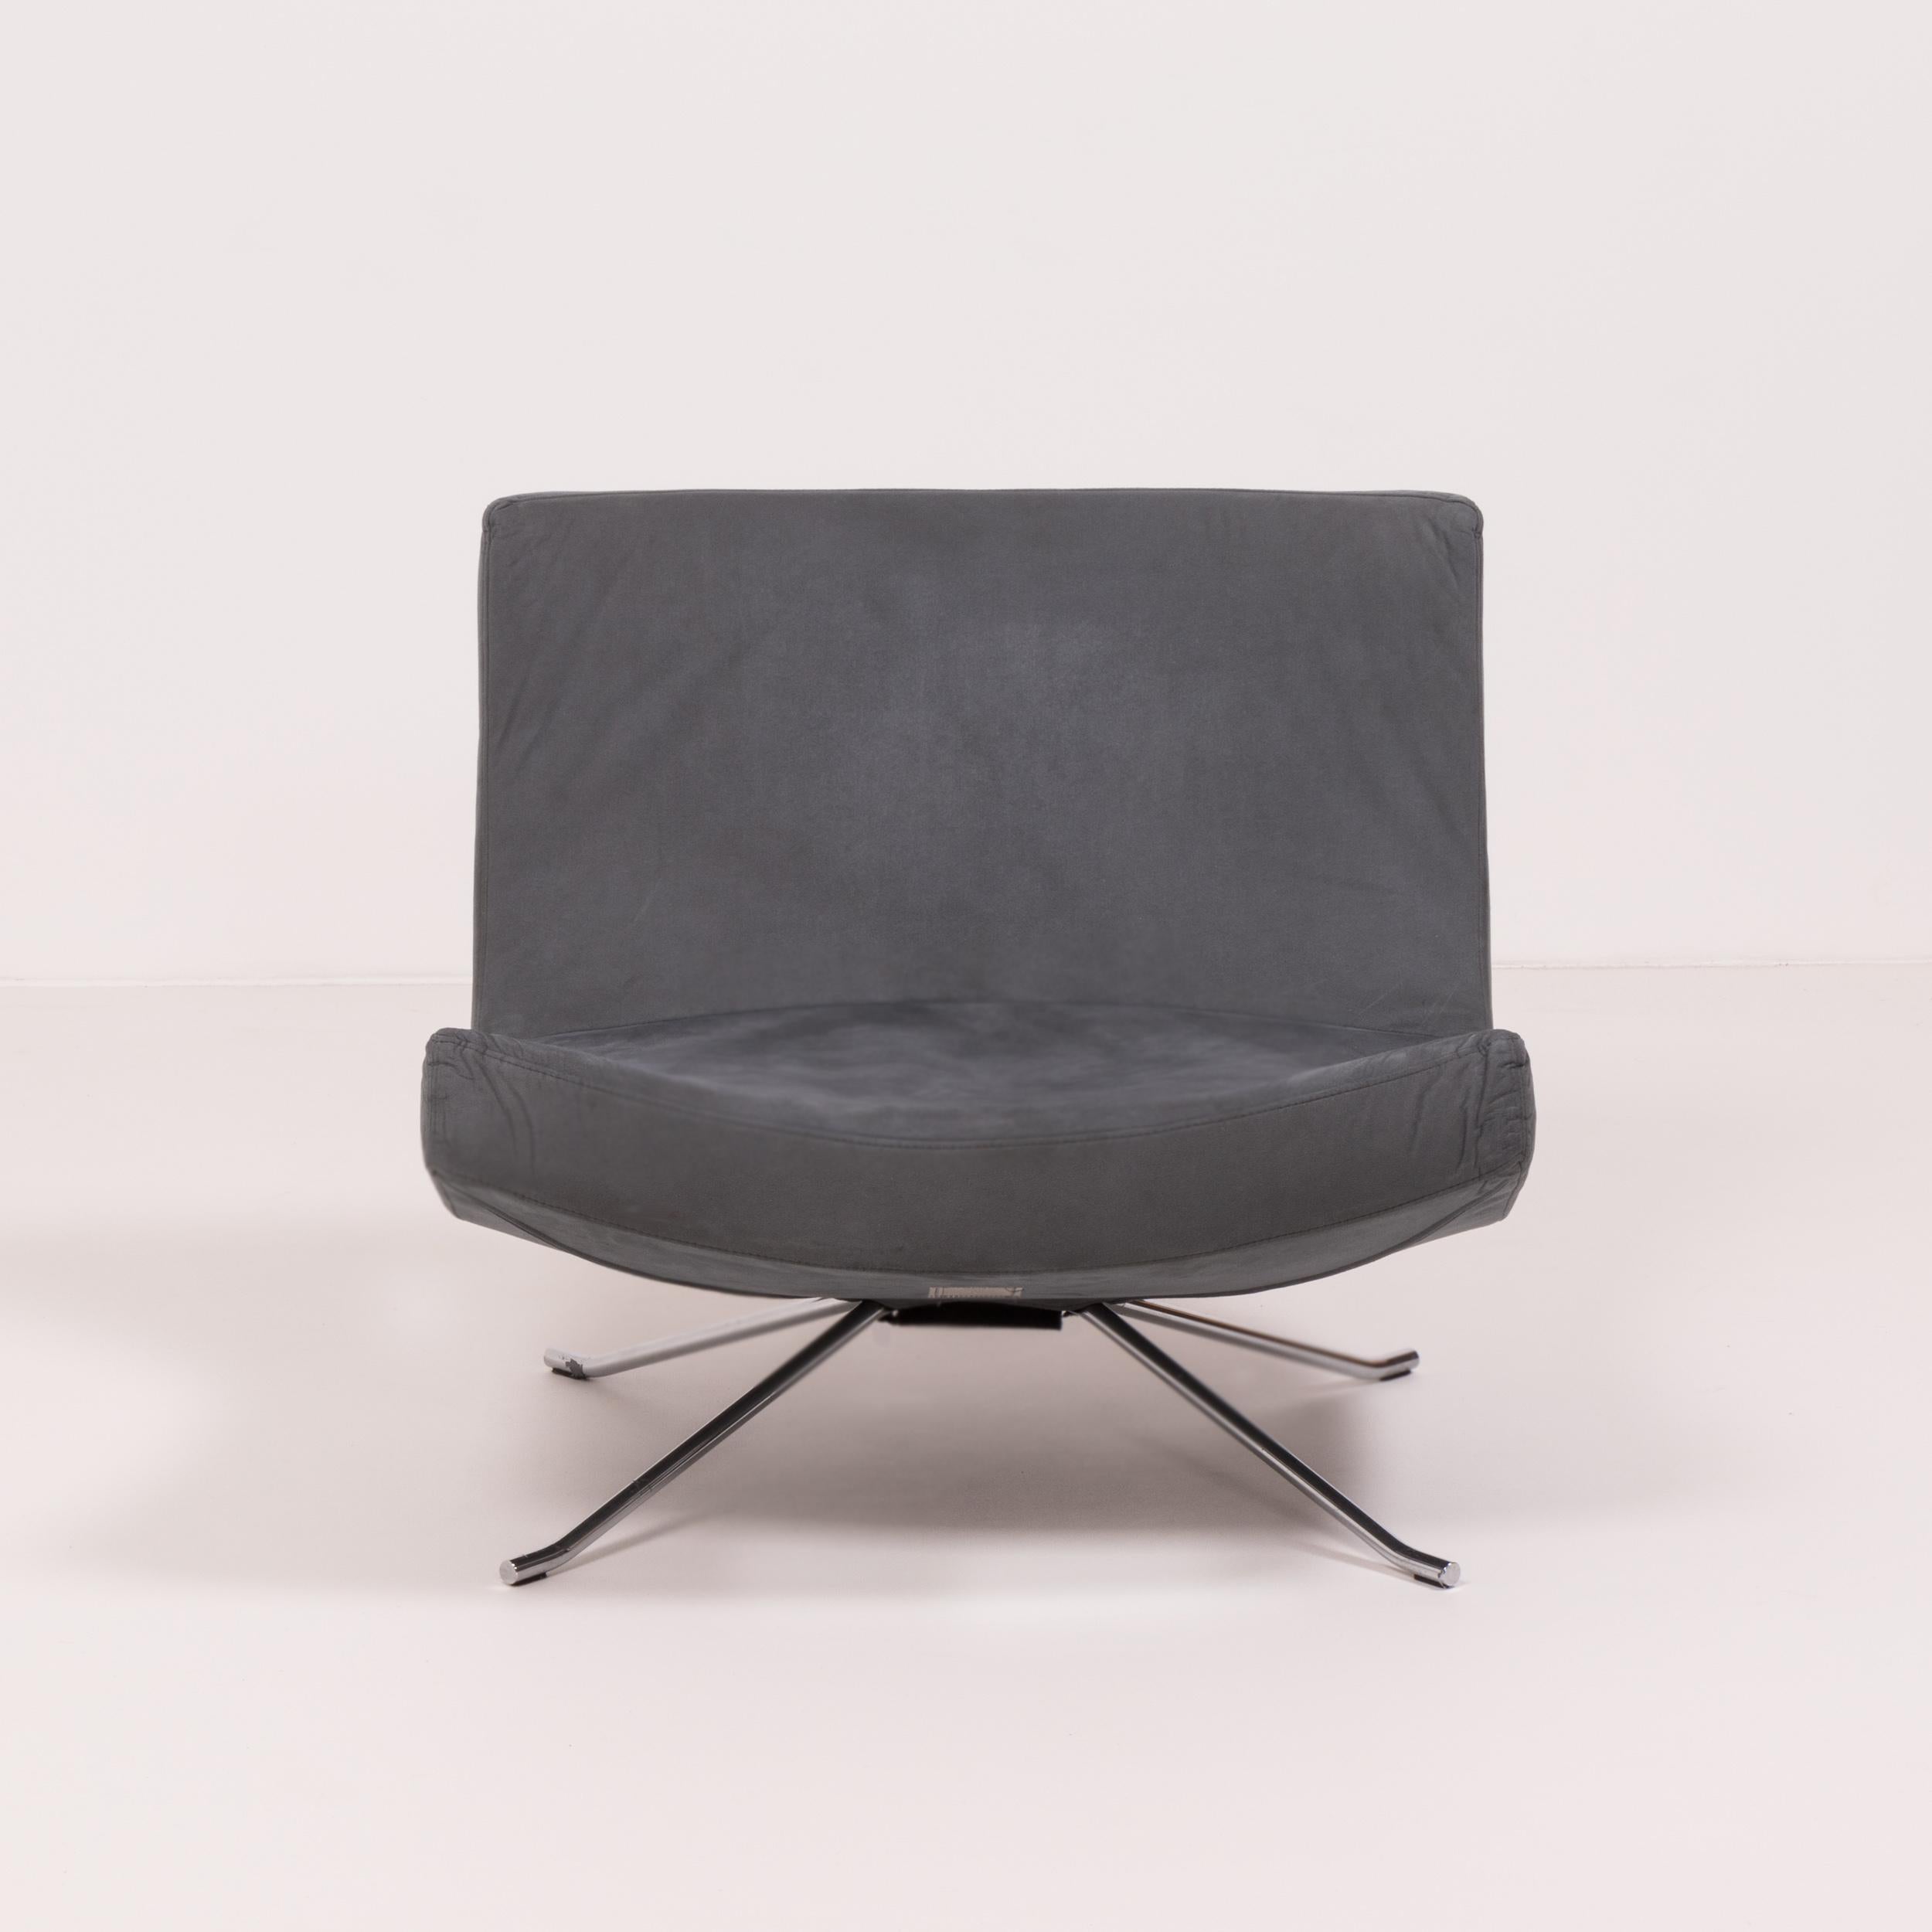 French Set of Two Pop Chairs by Christian Werner for Ligne Roset